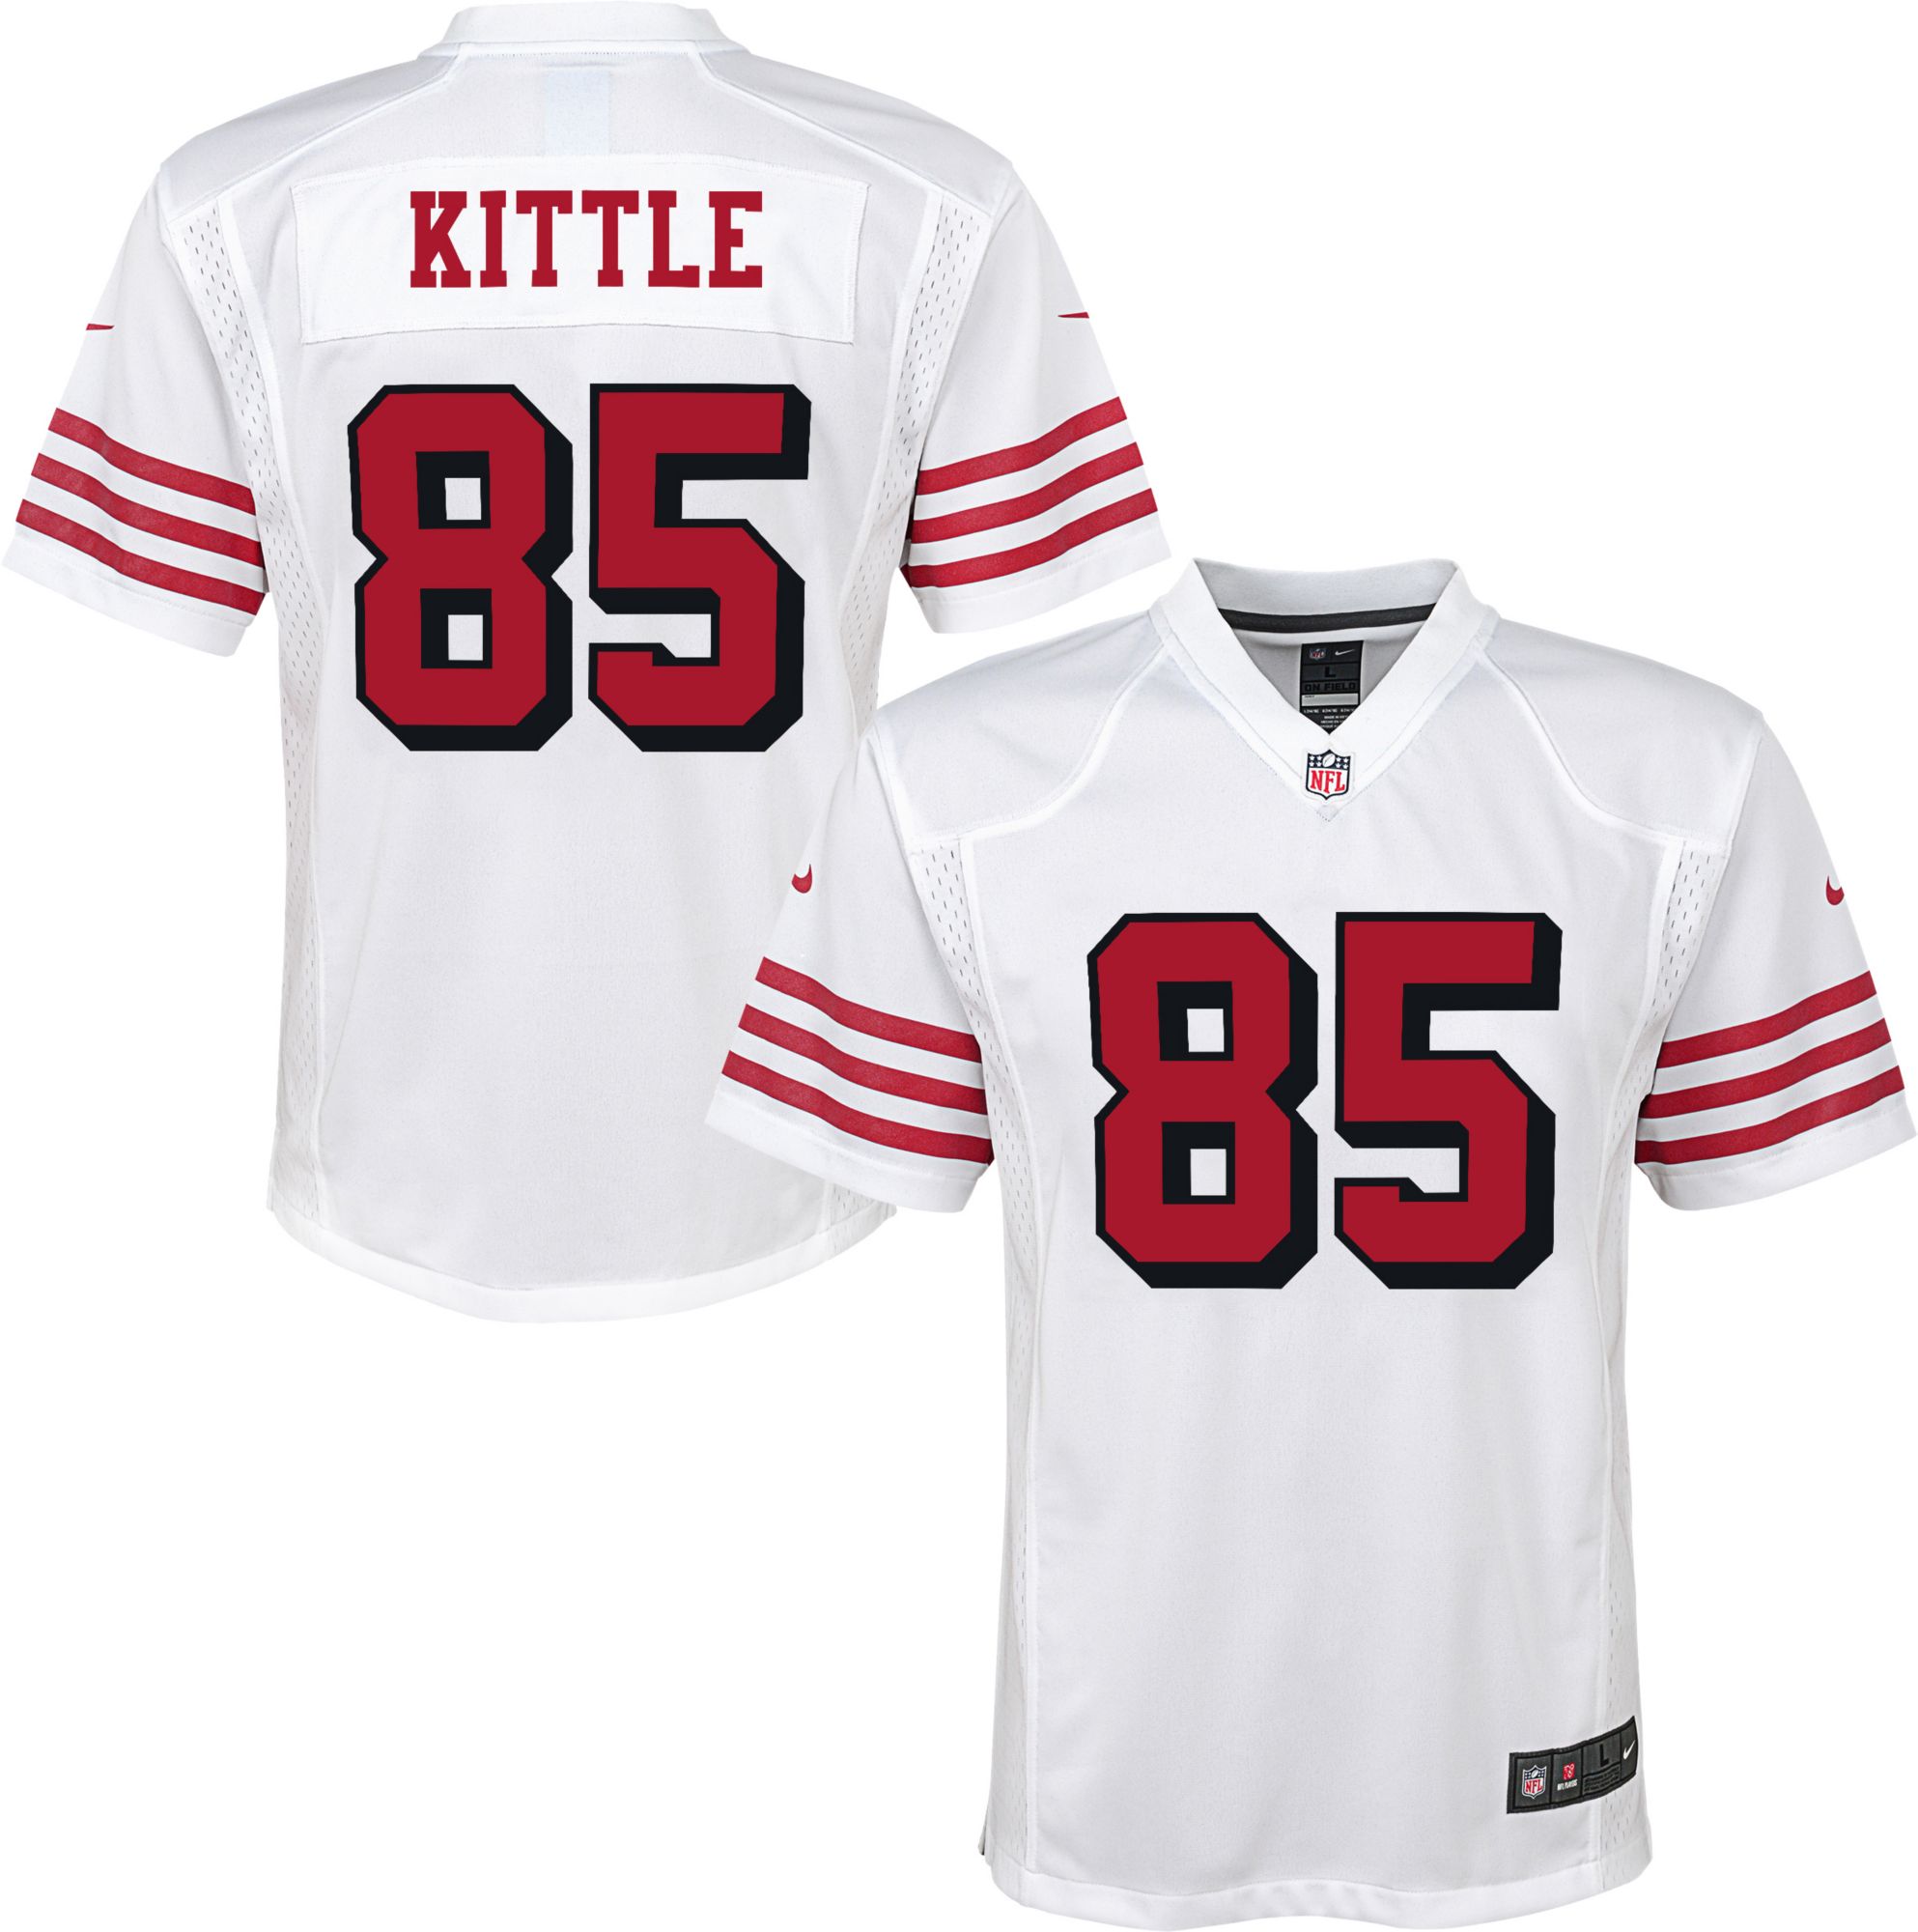 white george kittle jersey